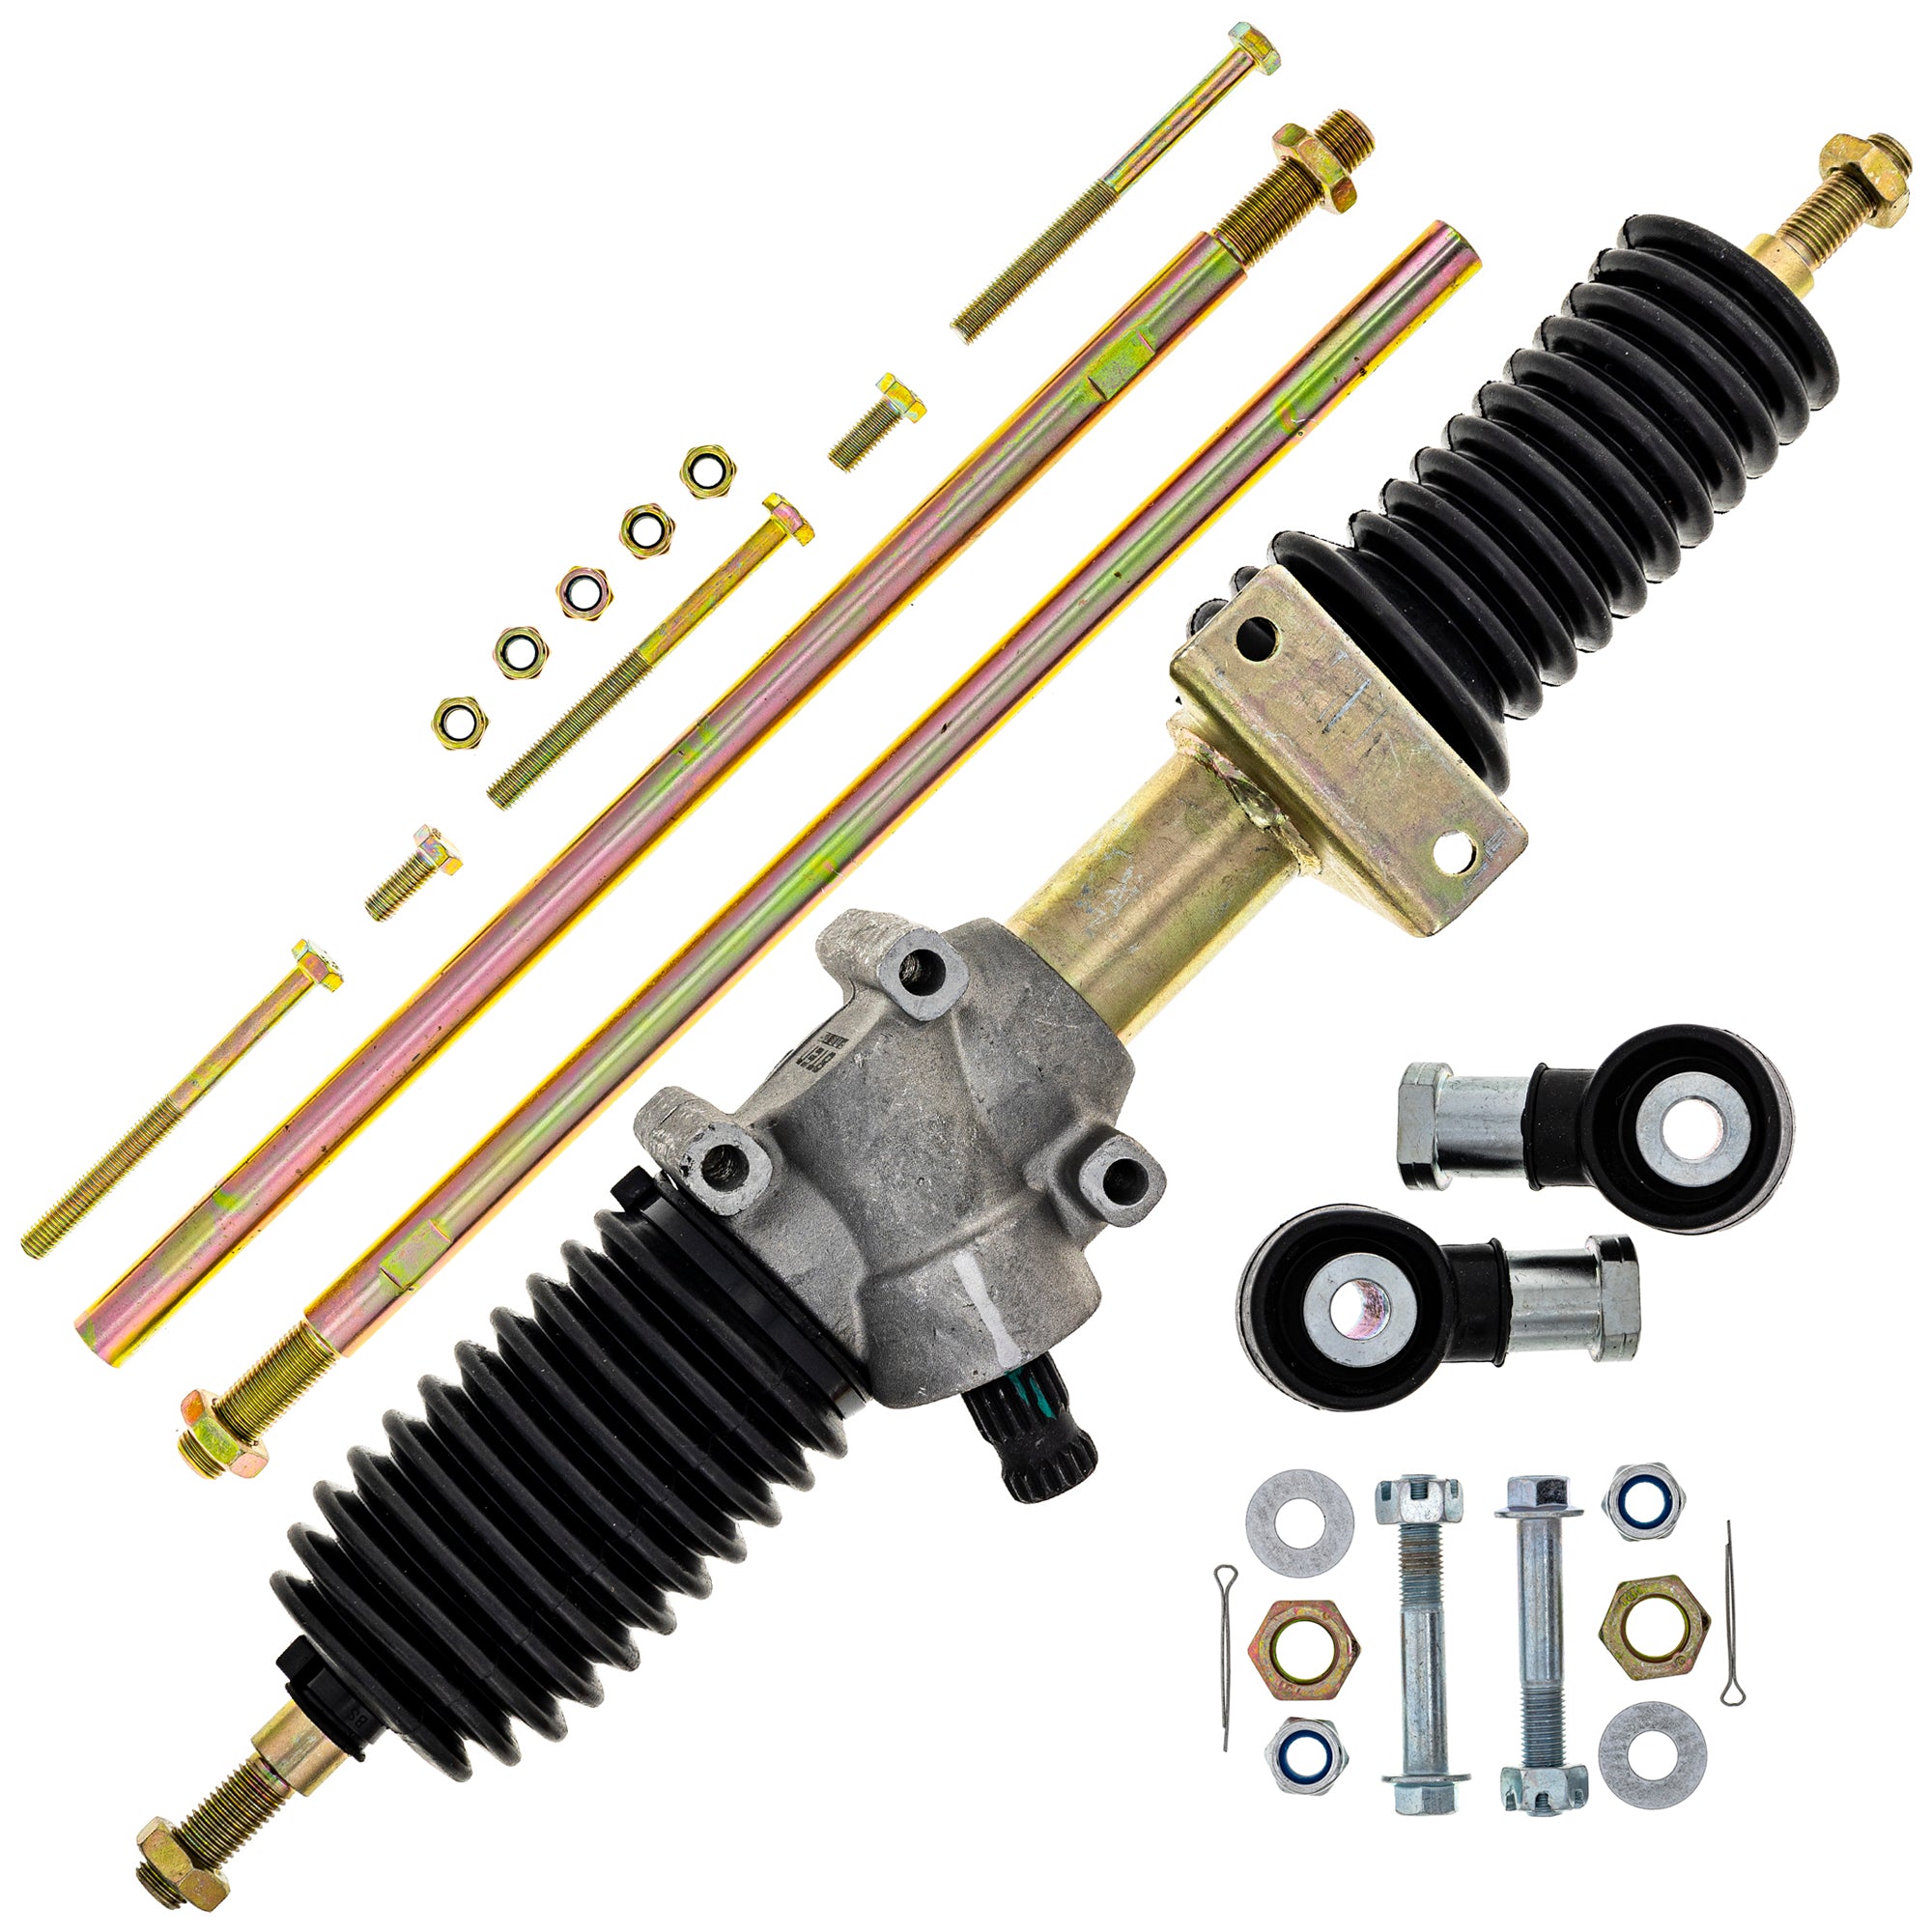 Steering Rack Assembly & Tie Rods Kit for Polaris RZR NICHE MK1009493